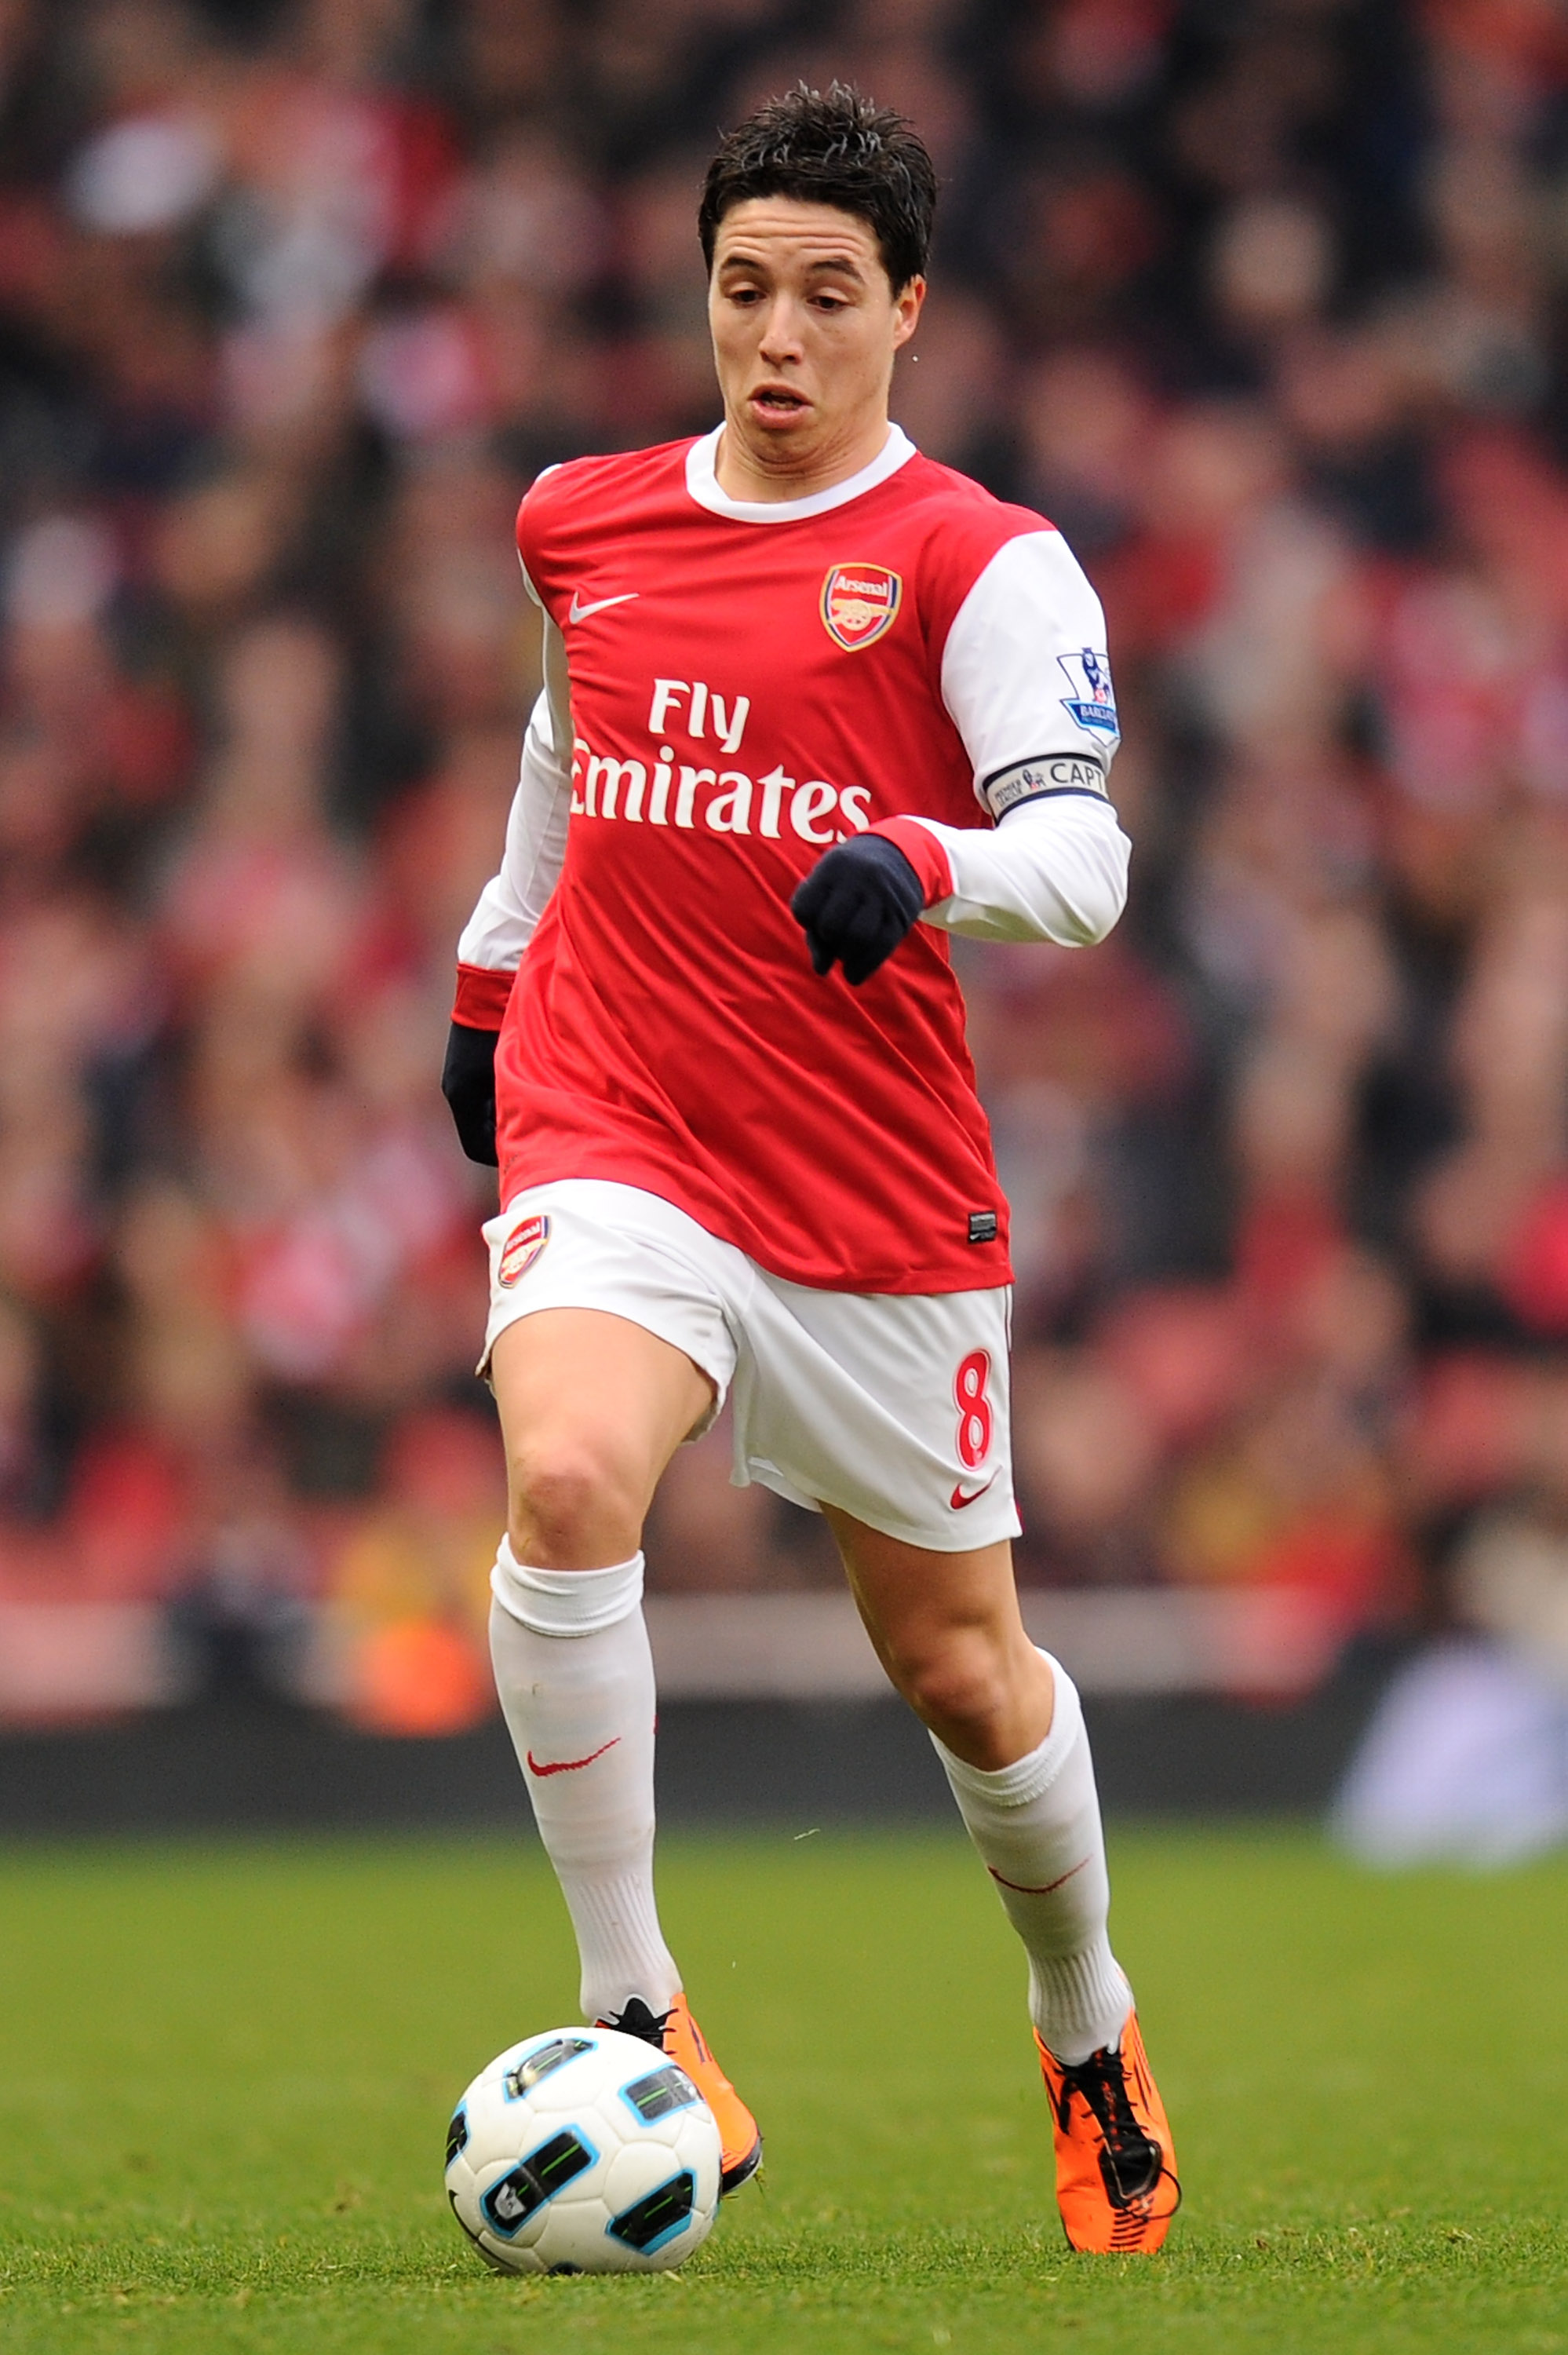 LONDON, ENGLAND - MARCH 05:  Samir Nasri of Arsenal runs with the ball during the Barclays Premier League match between Arsenal and Sunderland at Emirates Stadium on March 5, 2011 in London, England.  (Photo by Mike Hewitt/Getty Images)